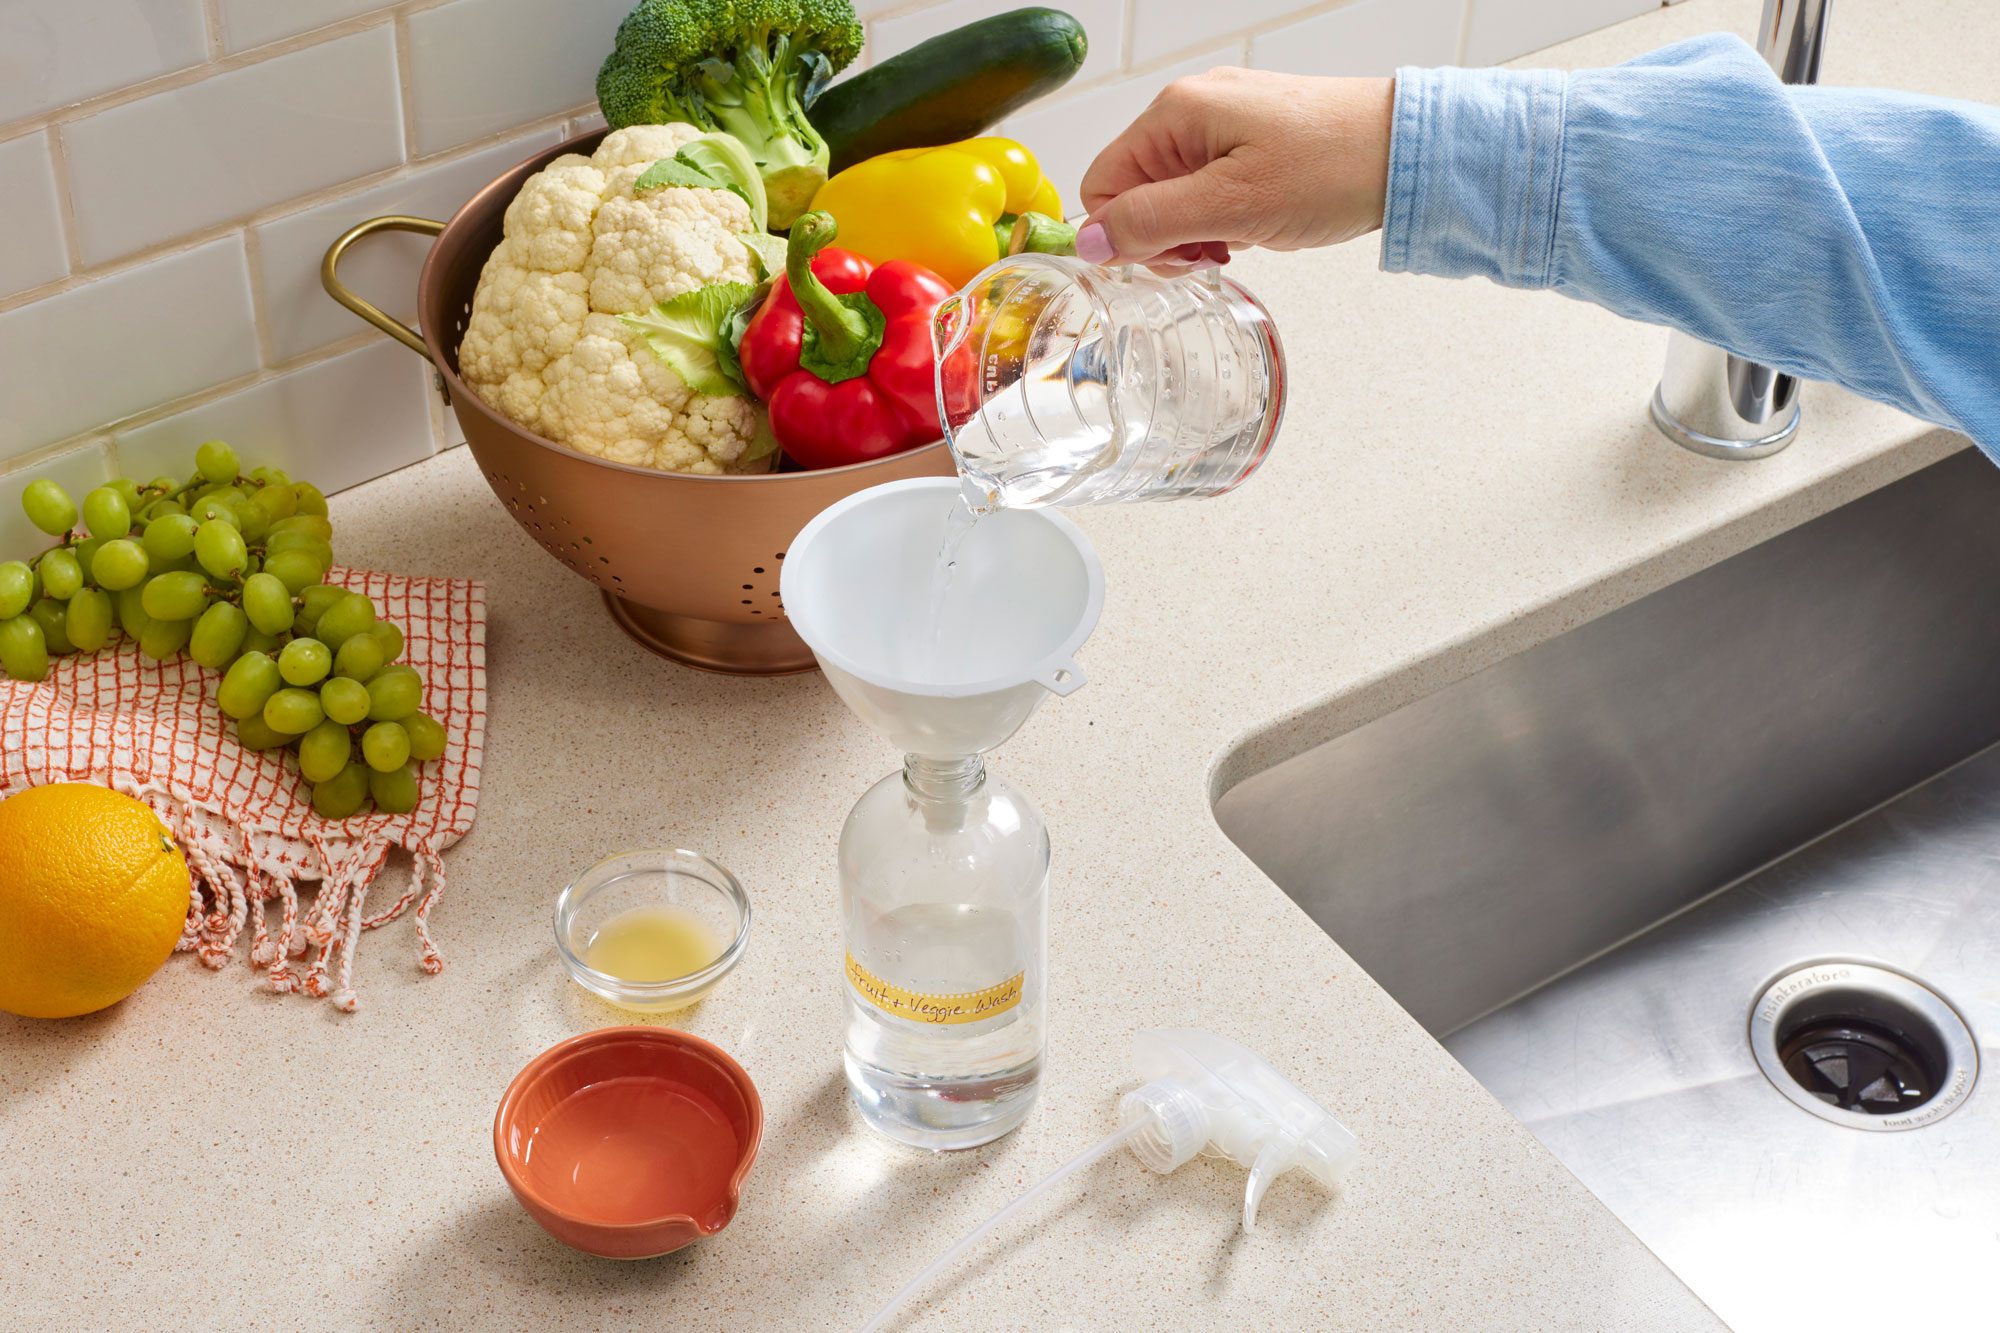 in a close-up kitchen setting, a hand with a funnel pours homemade ingredients for washing fruits and vegetables into a spray bottle. Some fresh fruits and vegetables are on the counter nearby